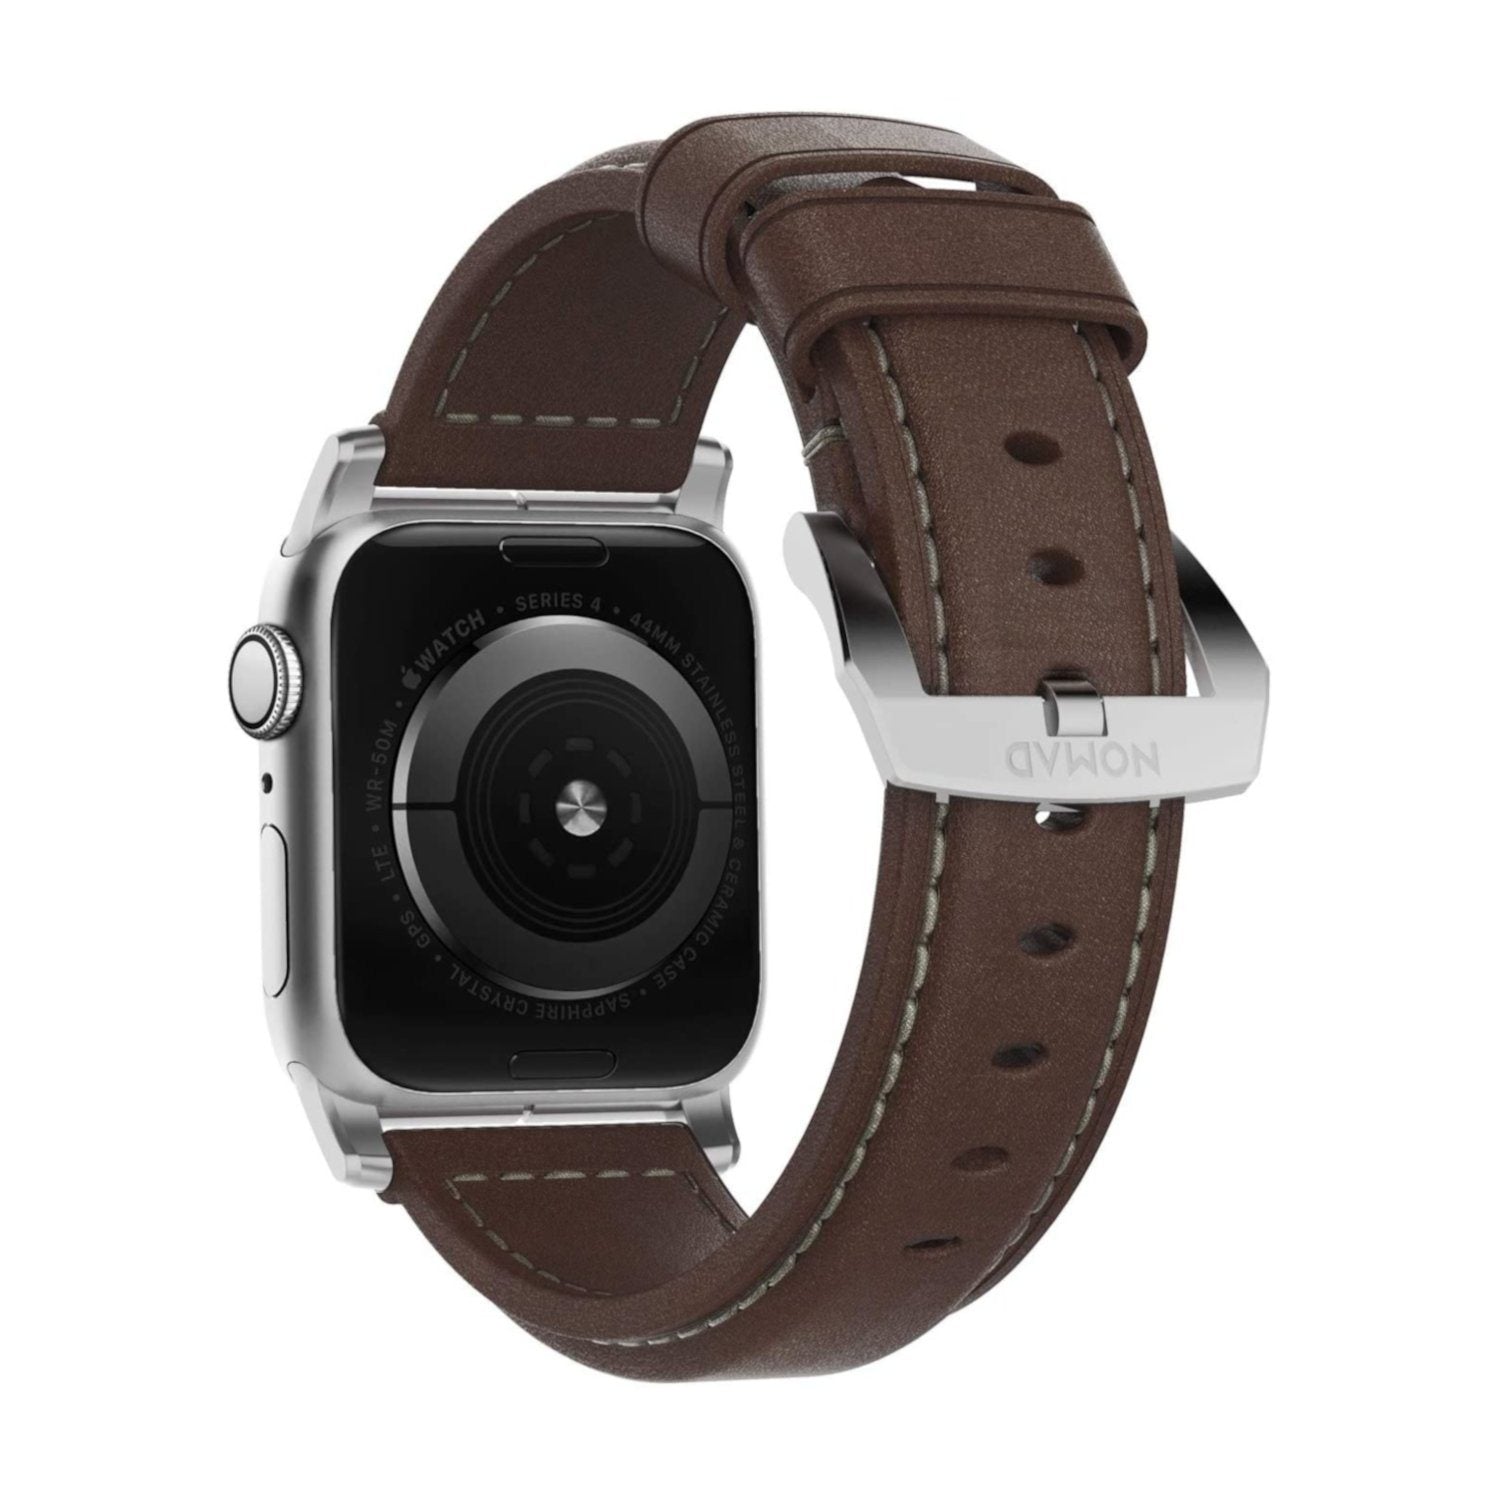 NOMAD Classic Strap Rustic Brown Horween Leather for Apple Watch 44mm/42mm, Silver Hardware Apple Watch Strap NOMAD 